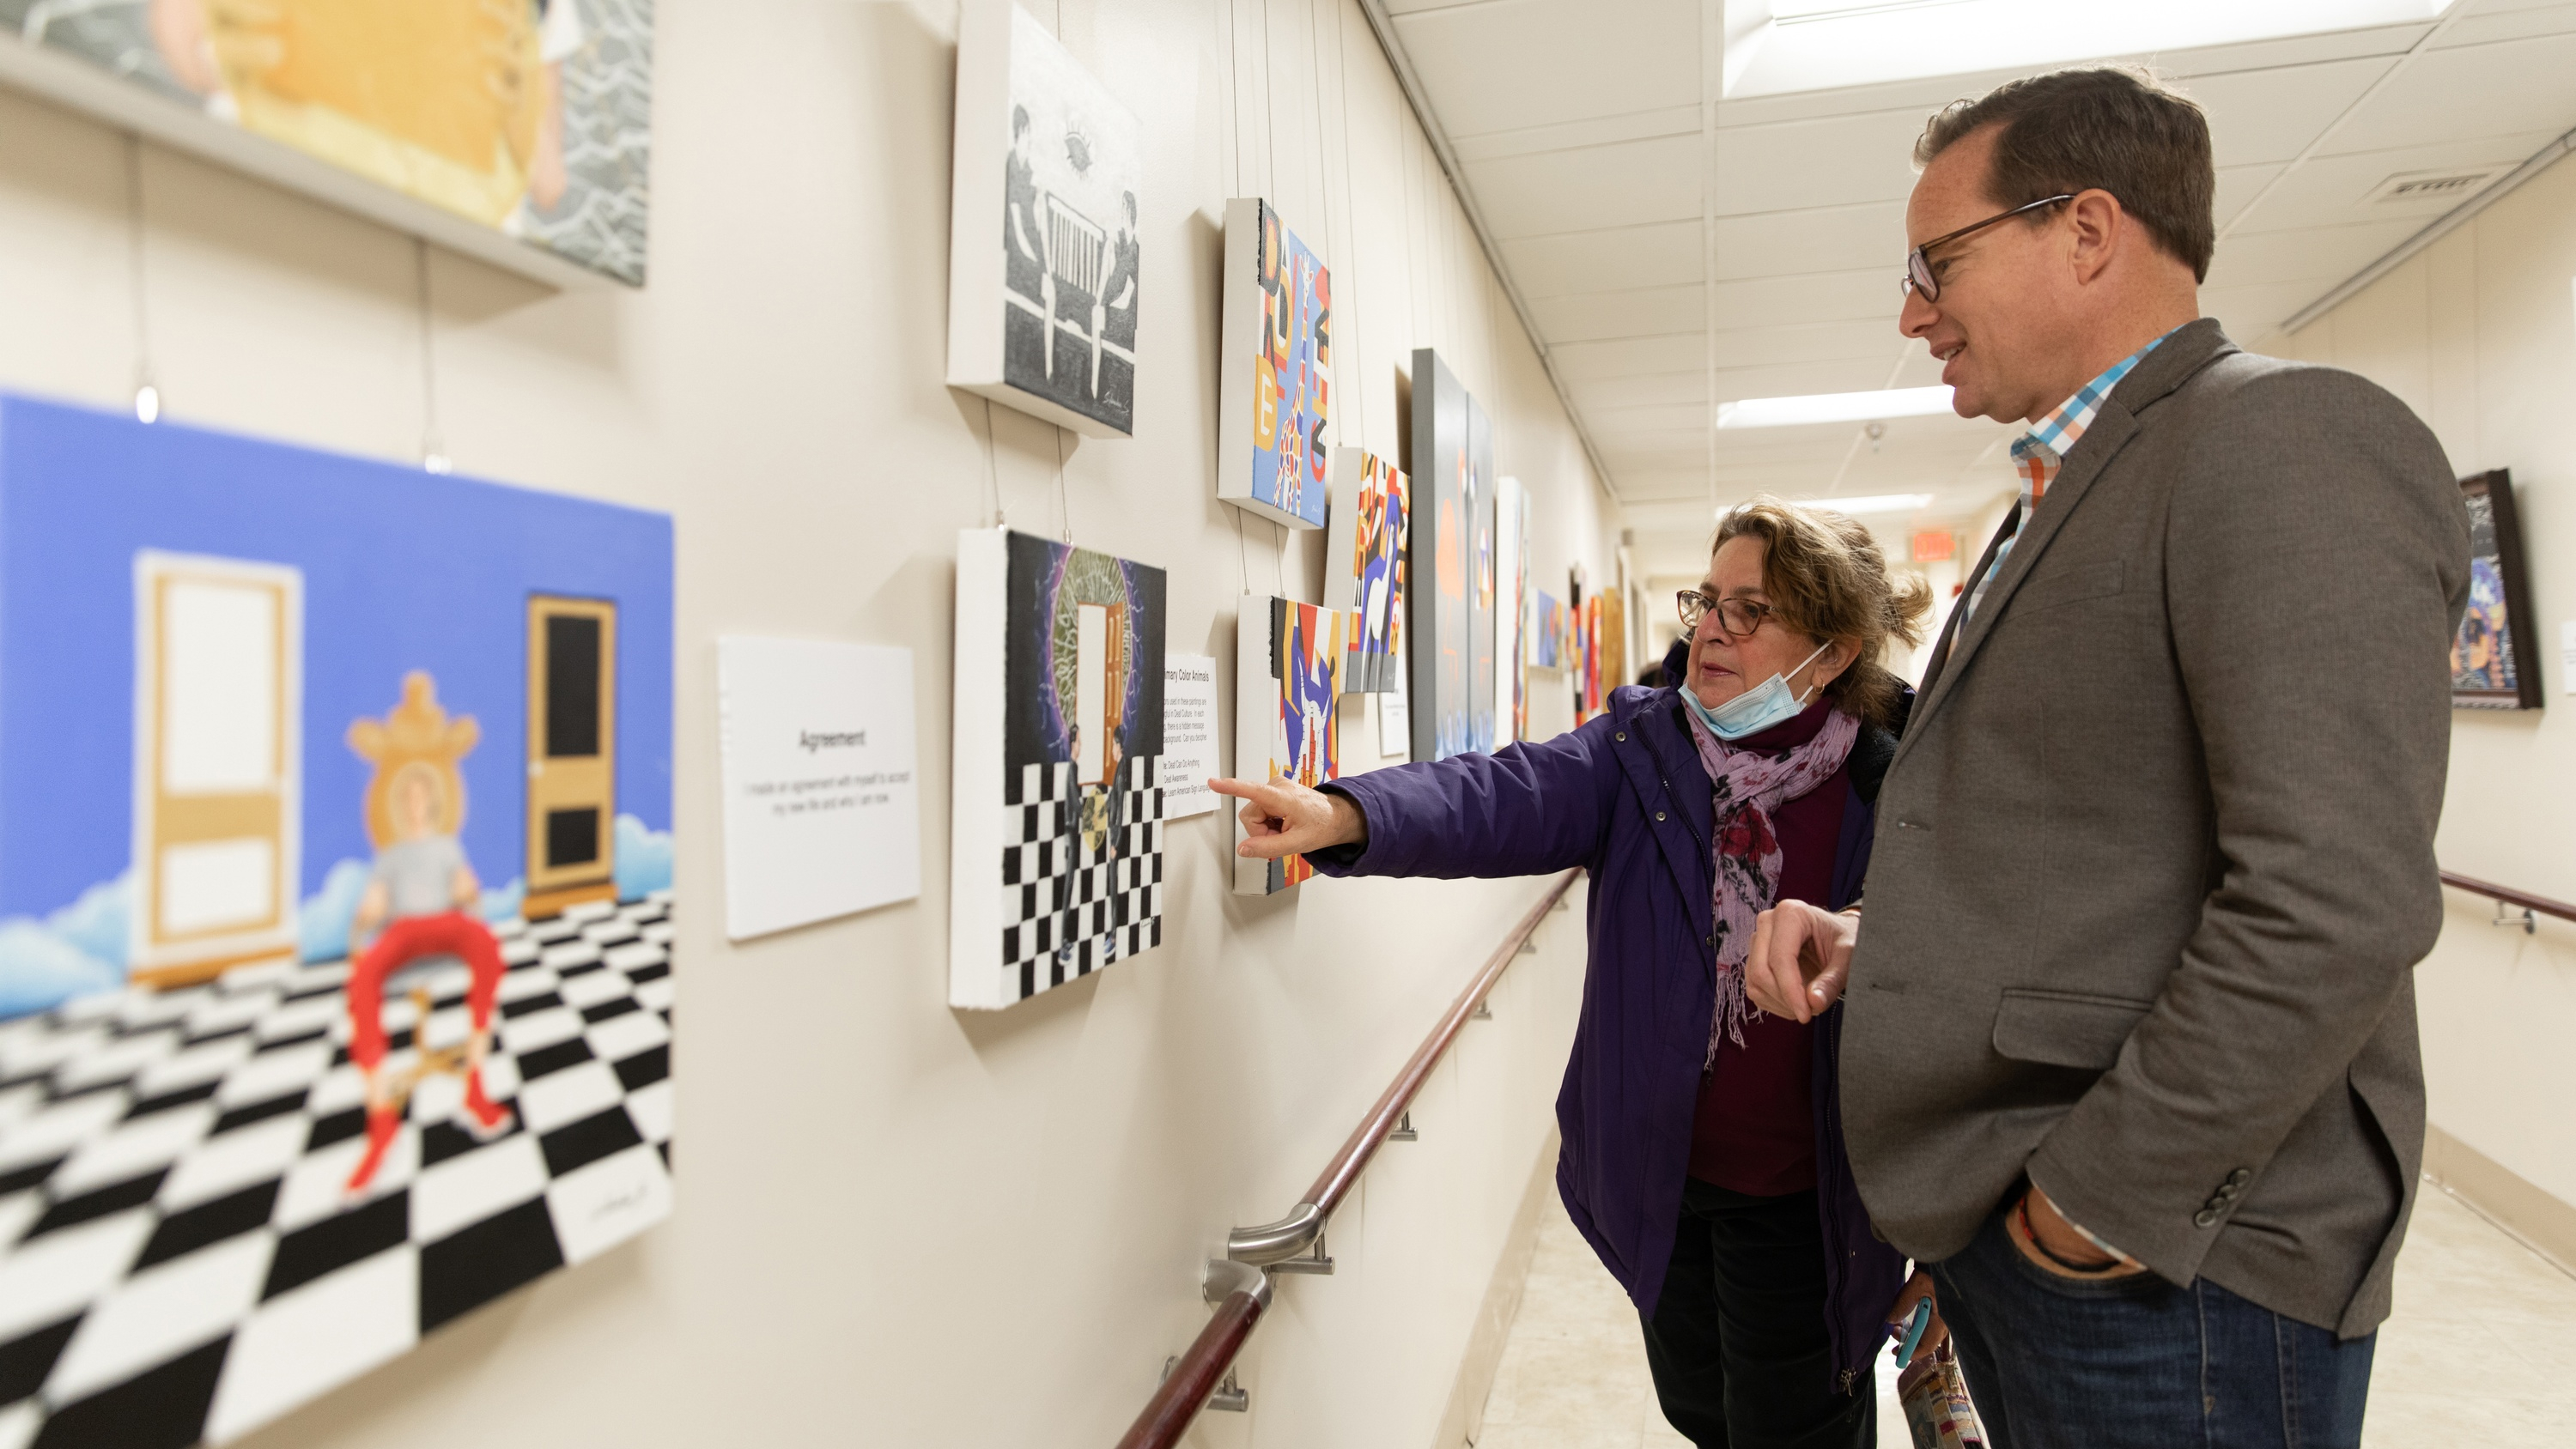 Two gallery-goers discuss Mr. Sanchez' works, pointing to a painting featuring a bold checkerboard in the lower half.